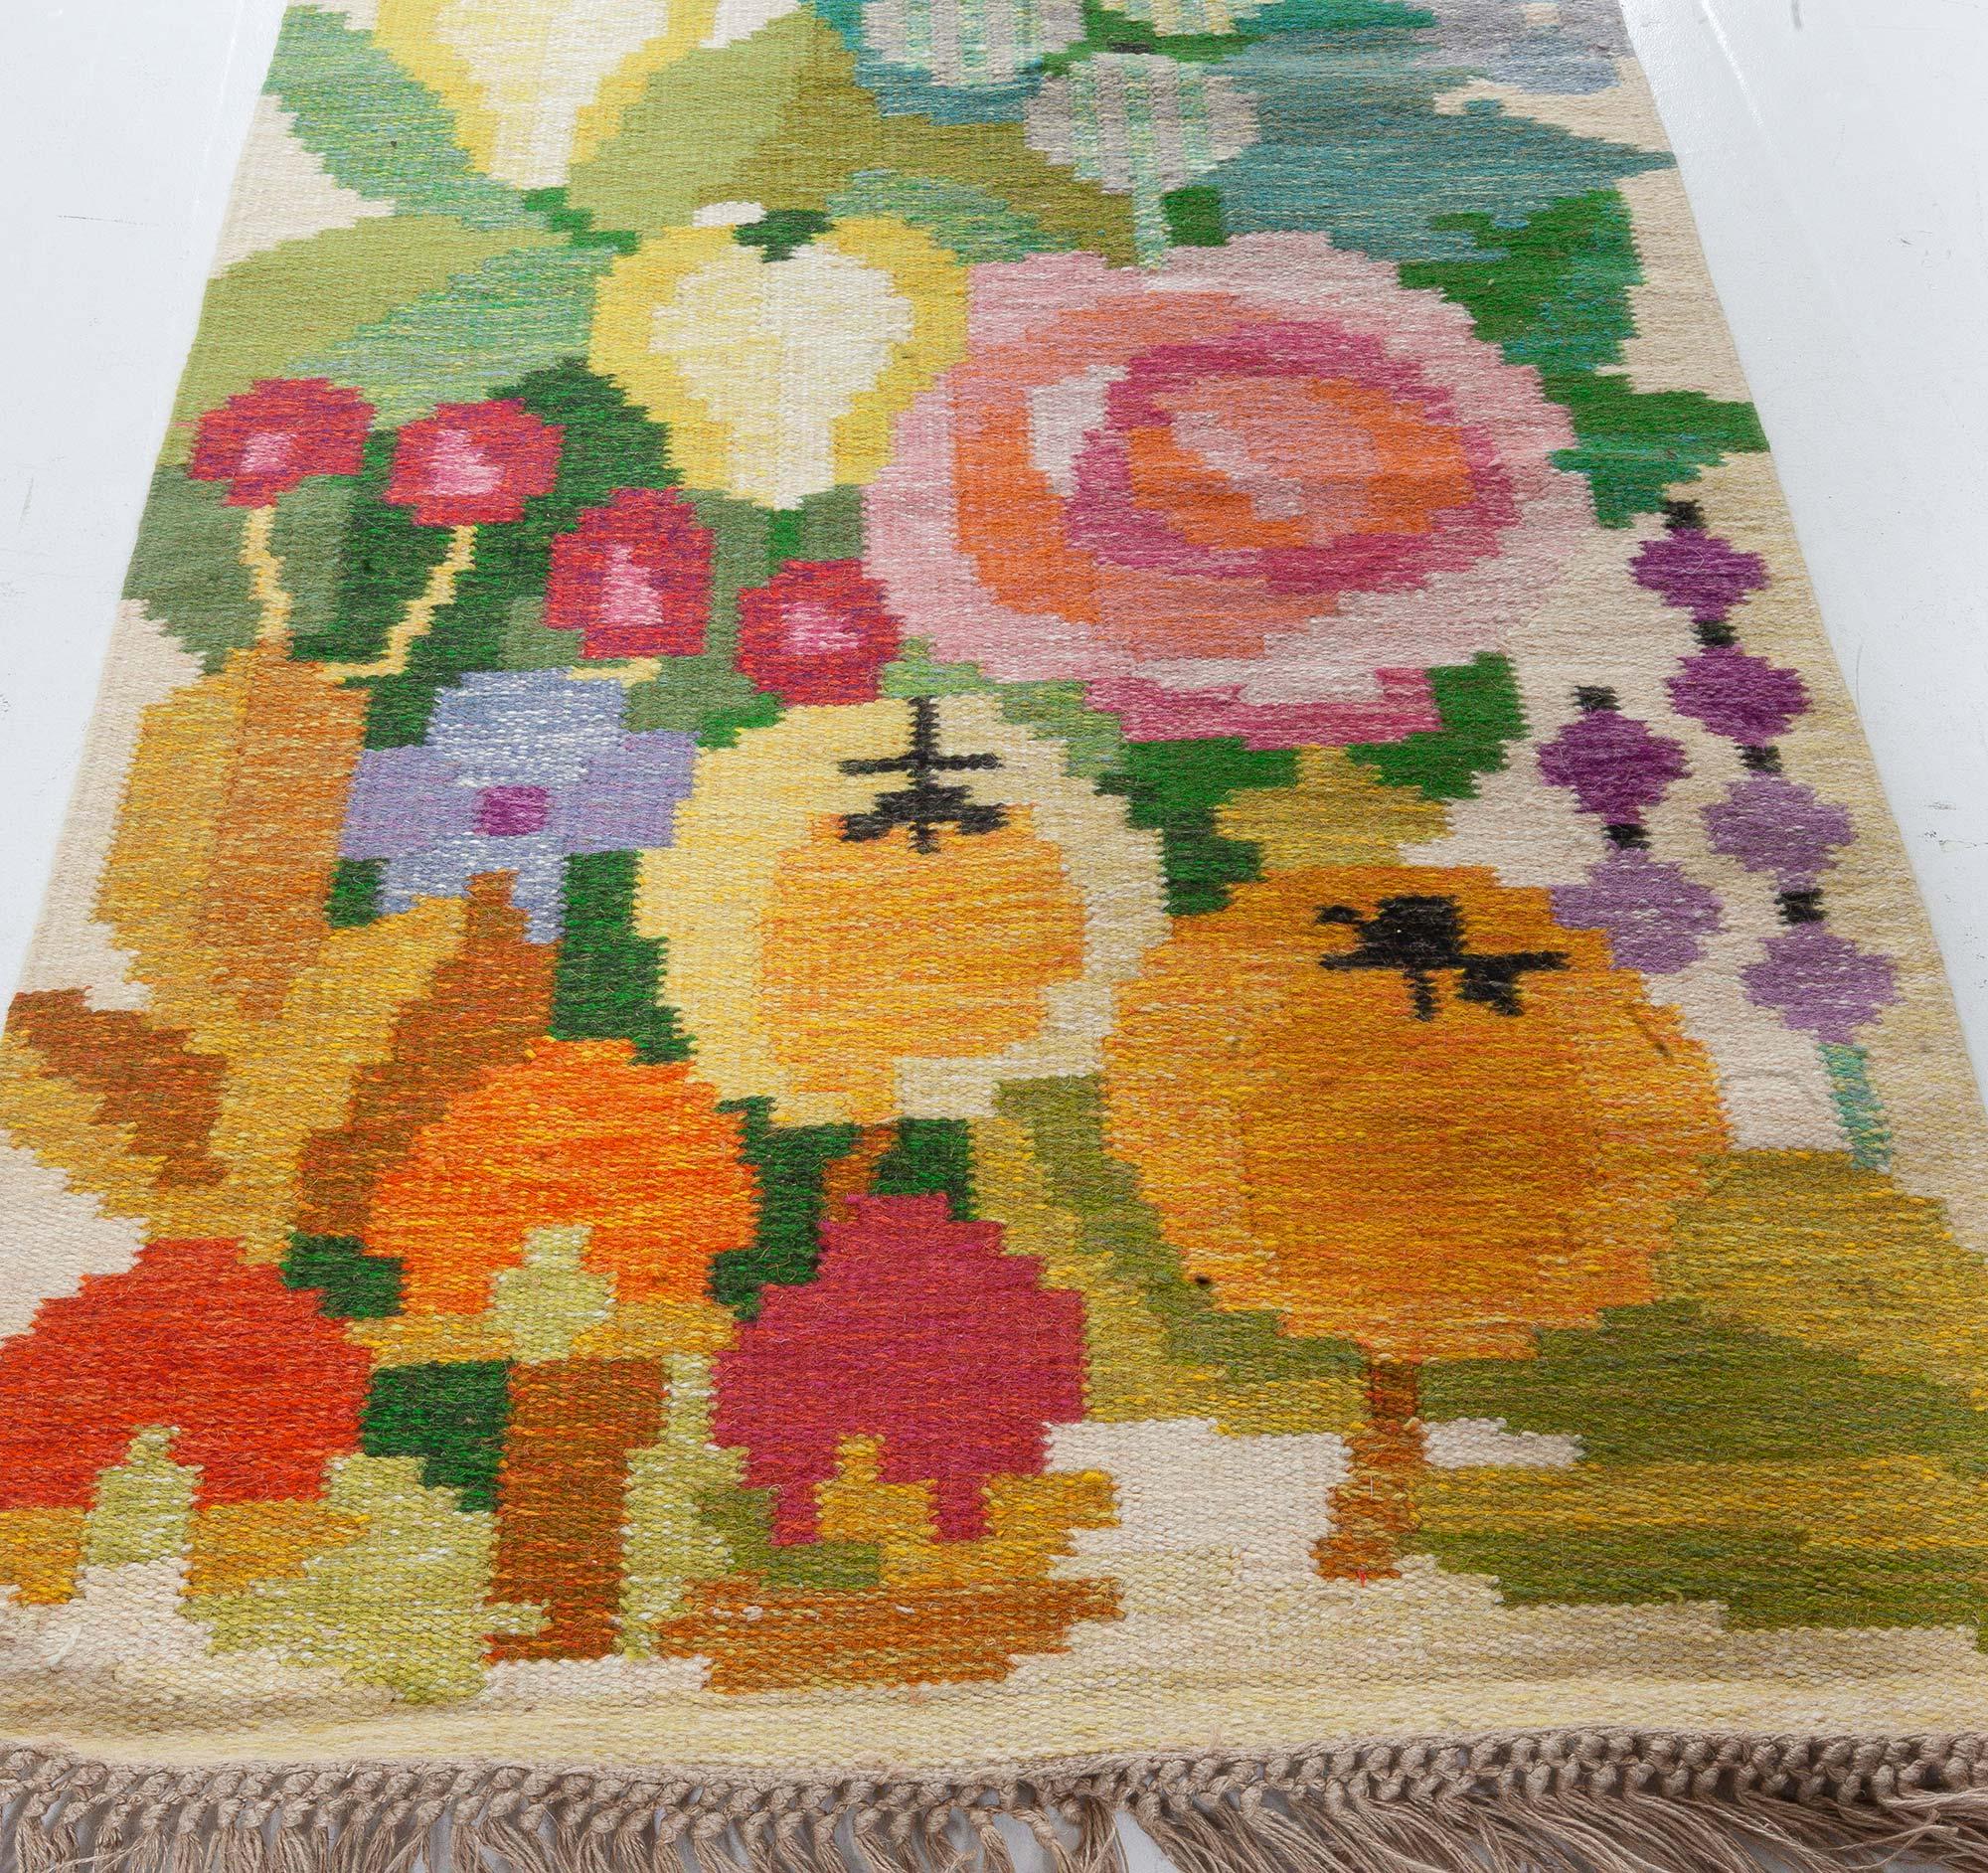 Vintage Swedish Floral Design Flat Woven Rug by Ingegerd Silow In Good Condition For Sale In New York, NY